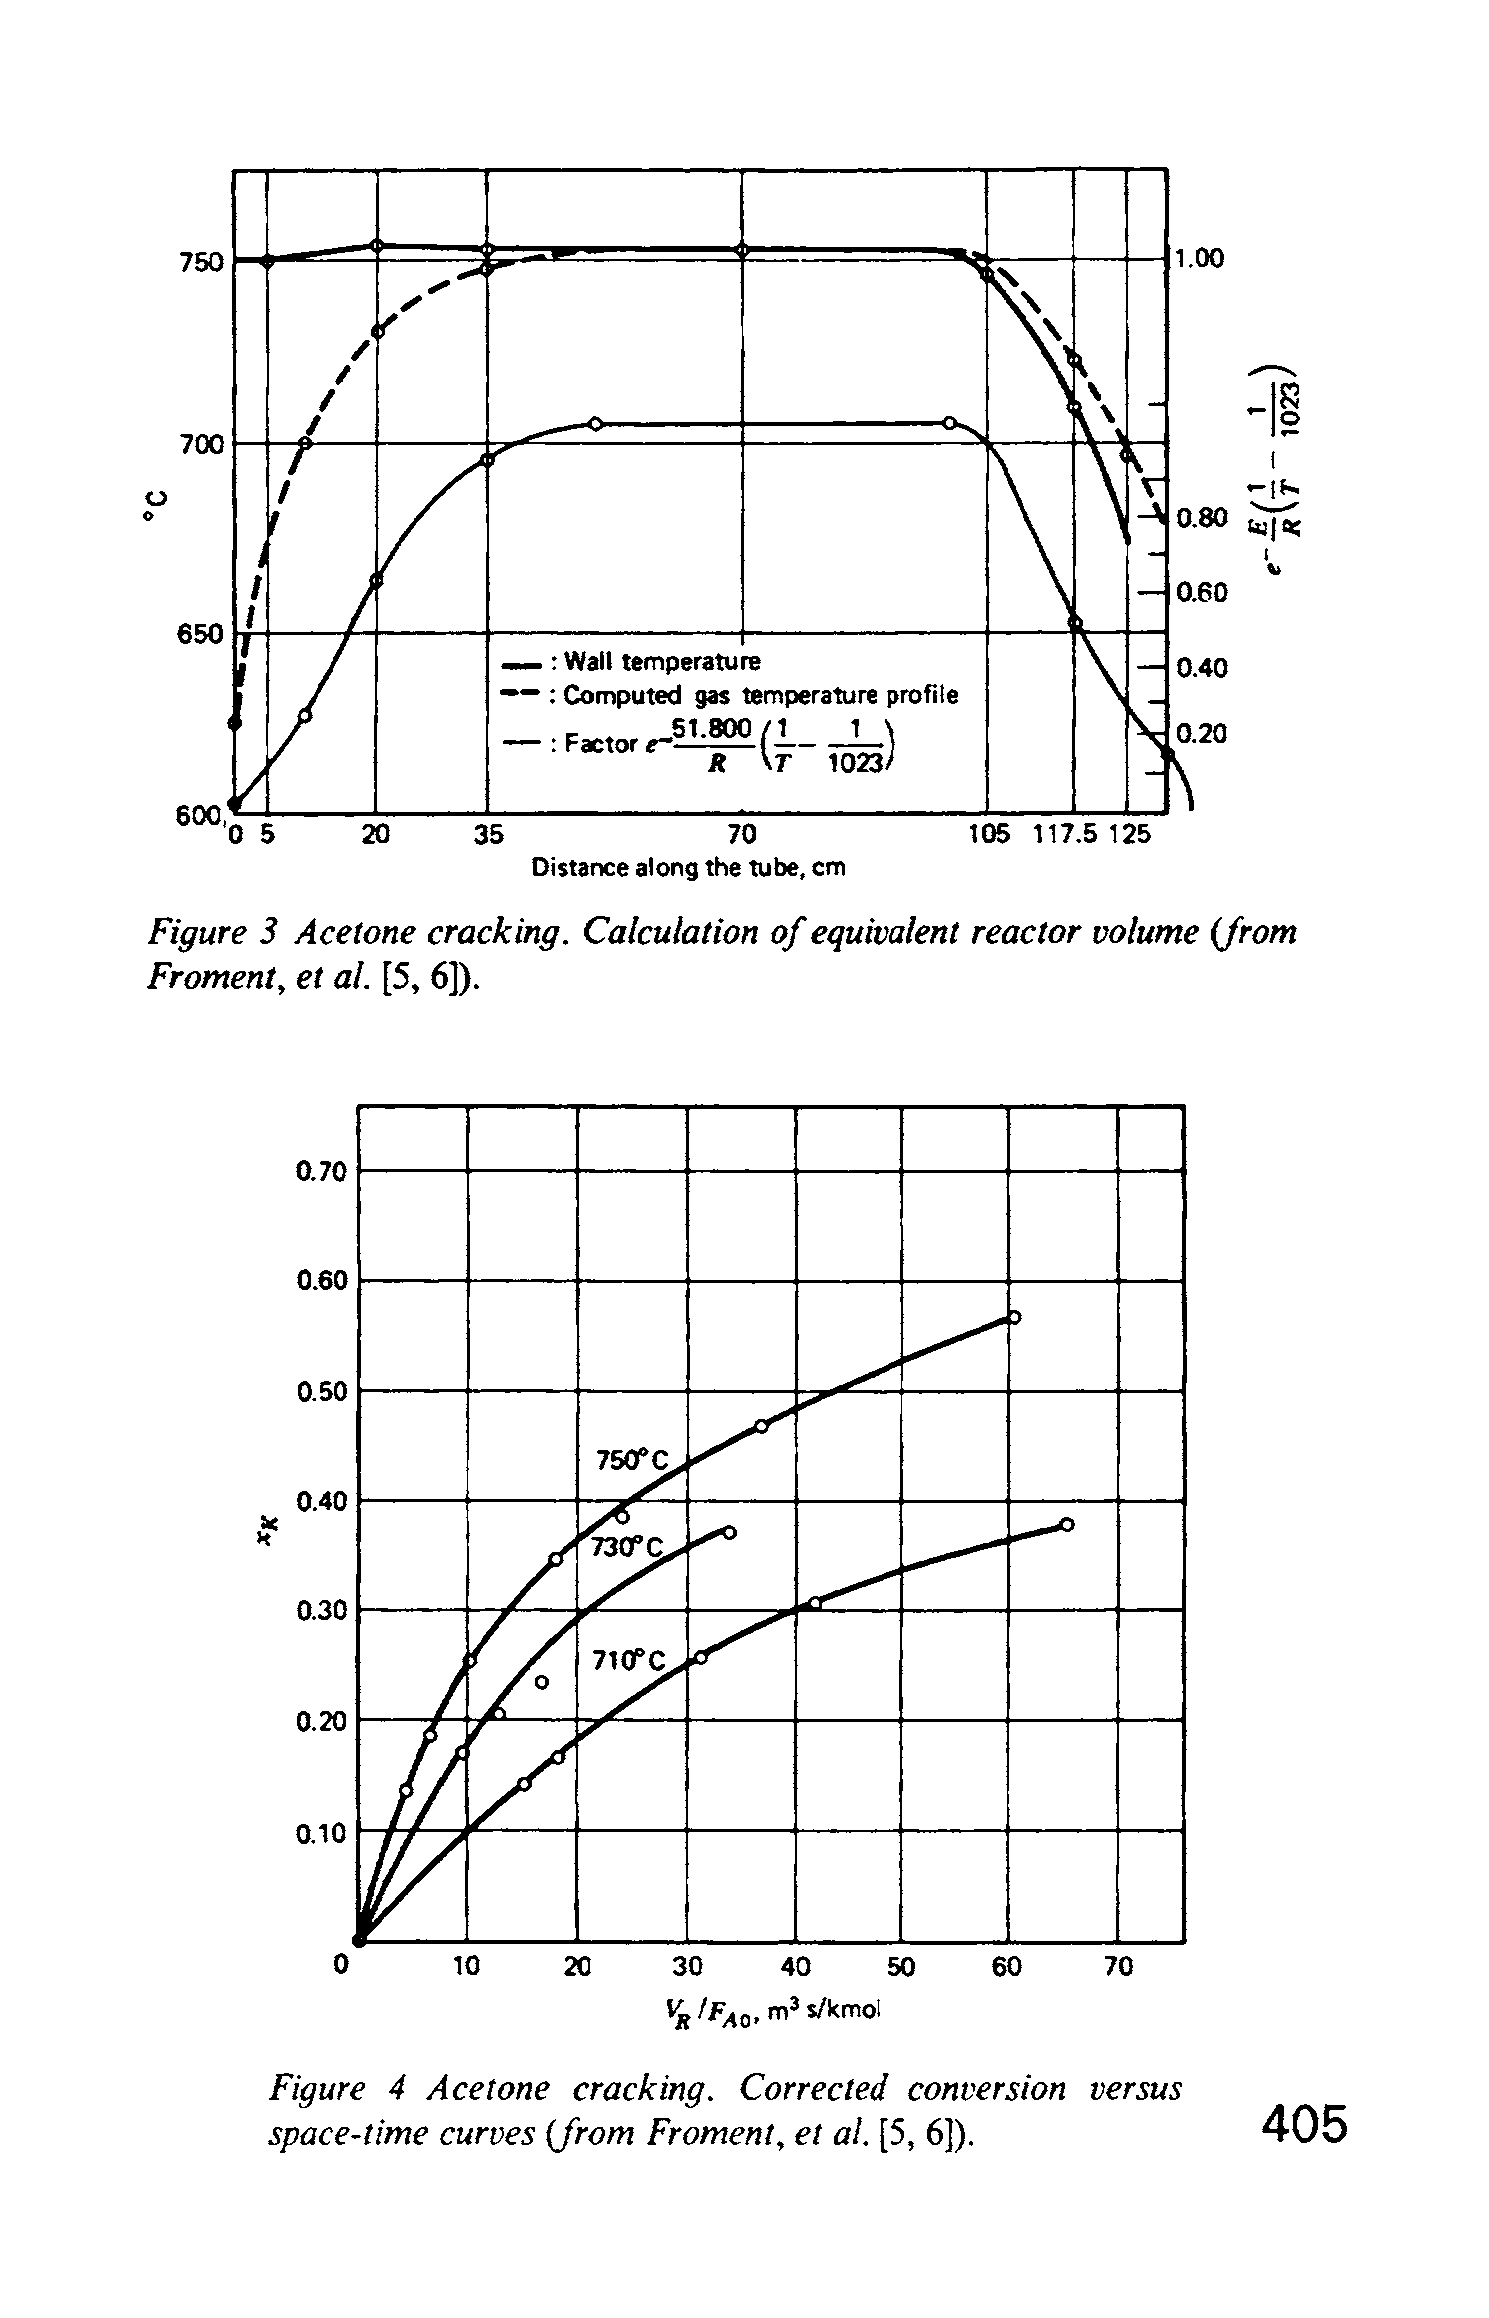 Figure 3 Acetone cracking. Calculation of equivalent reactor volume from Froment, et al. [5, 6]).